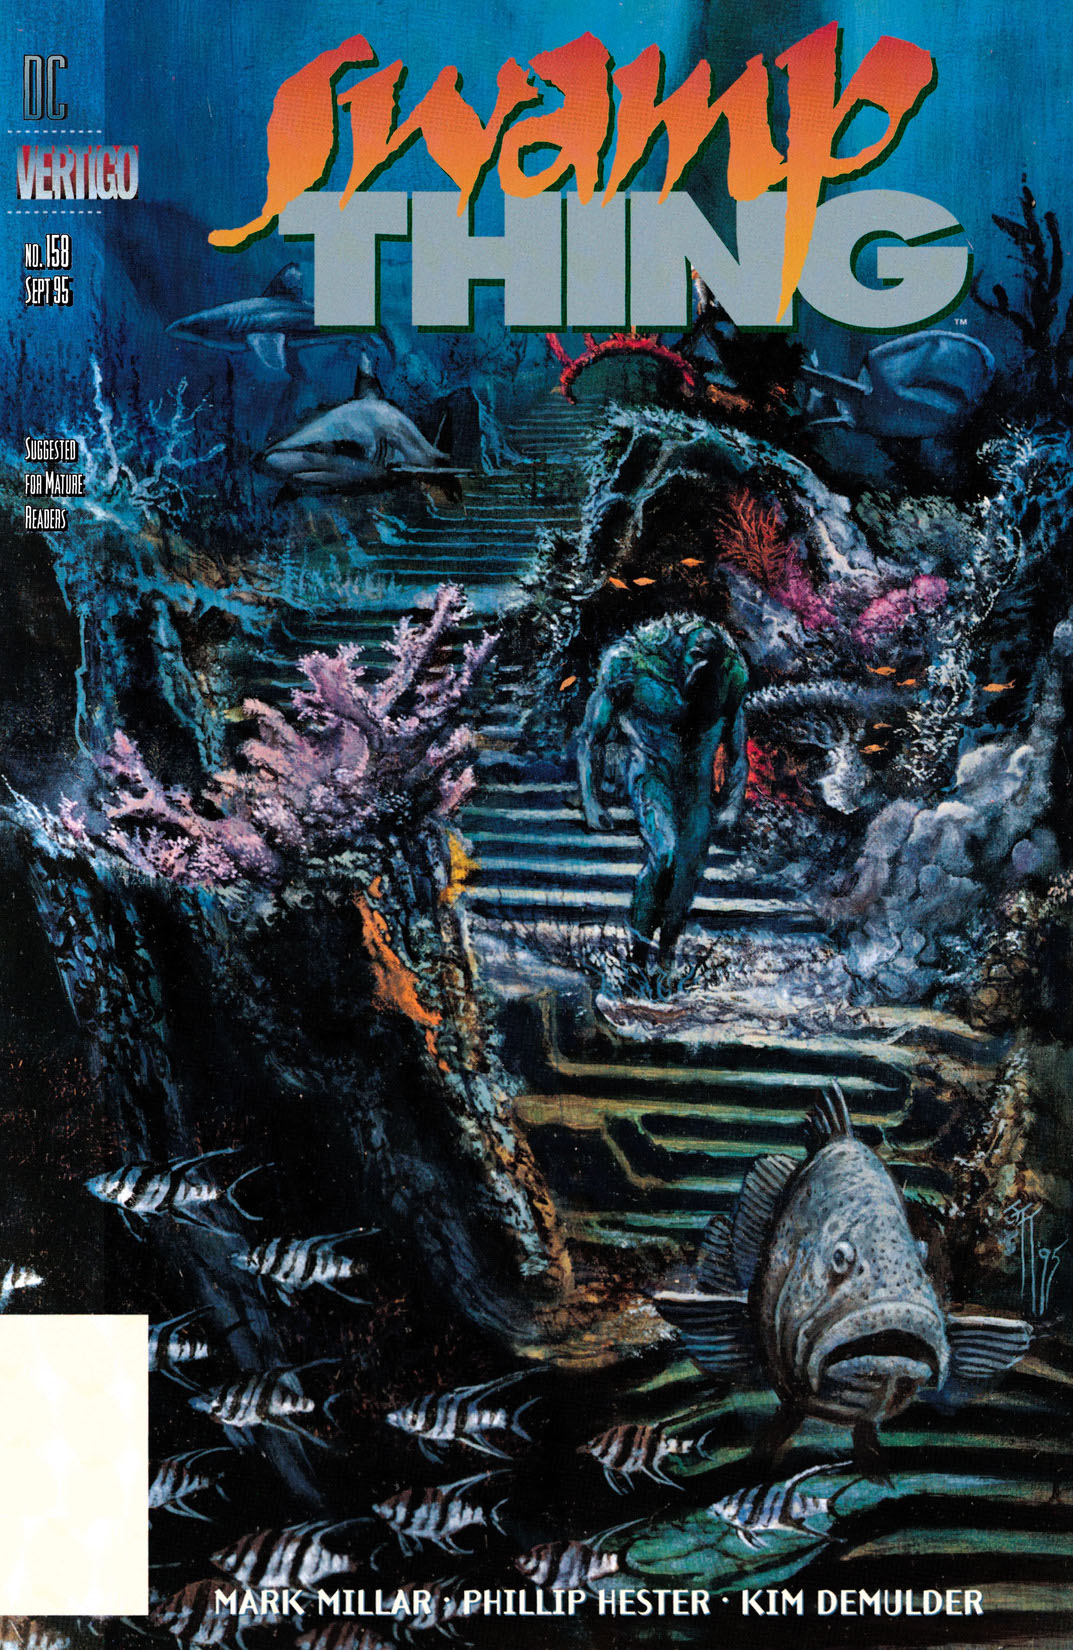 Swamp Thing (1985-) #158 preview images